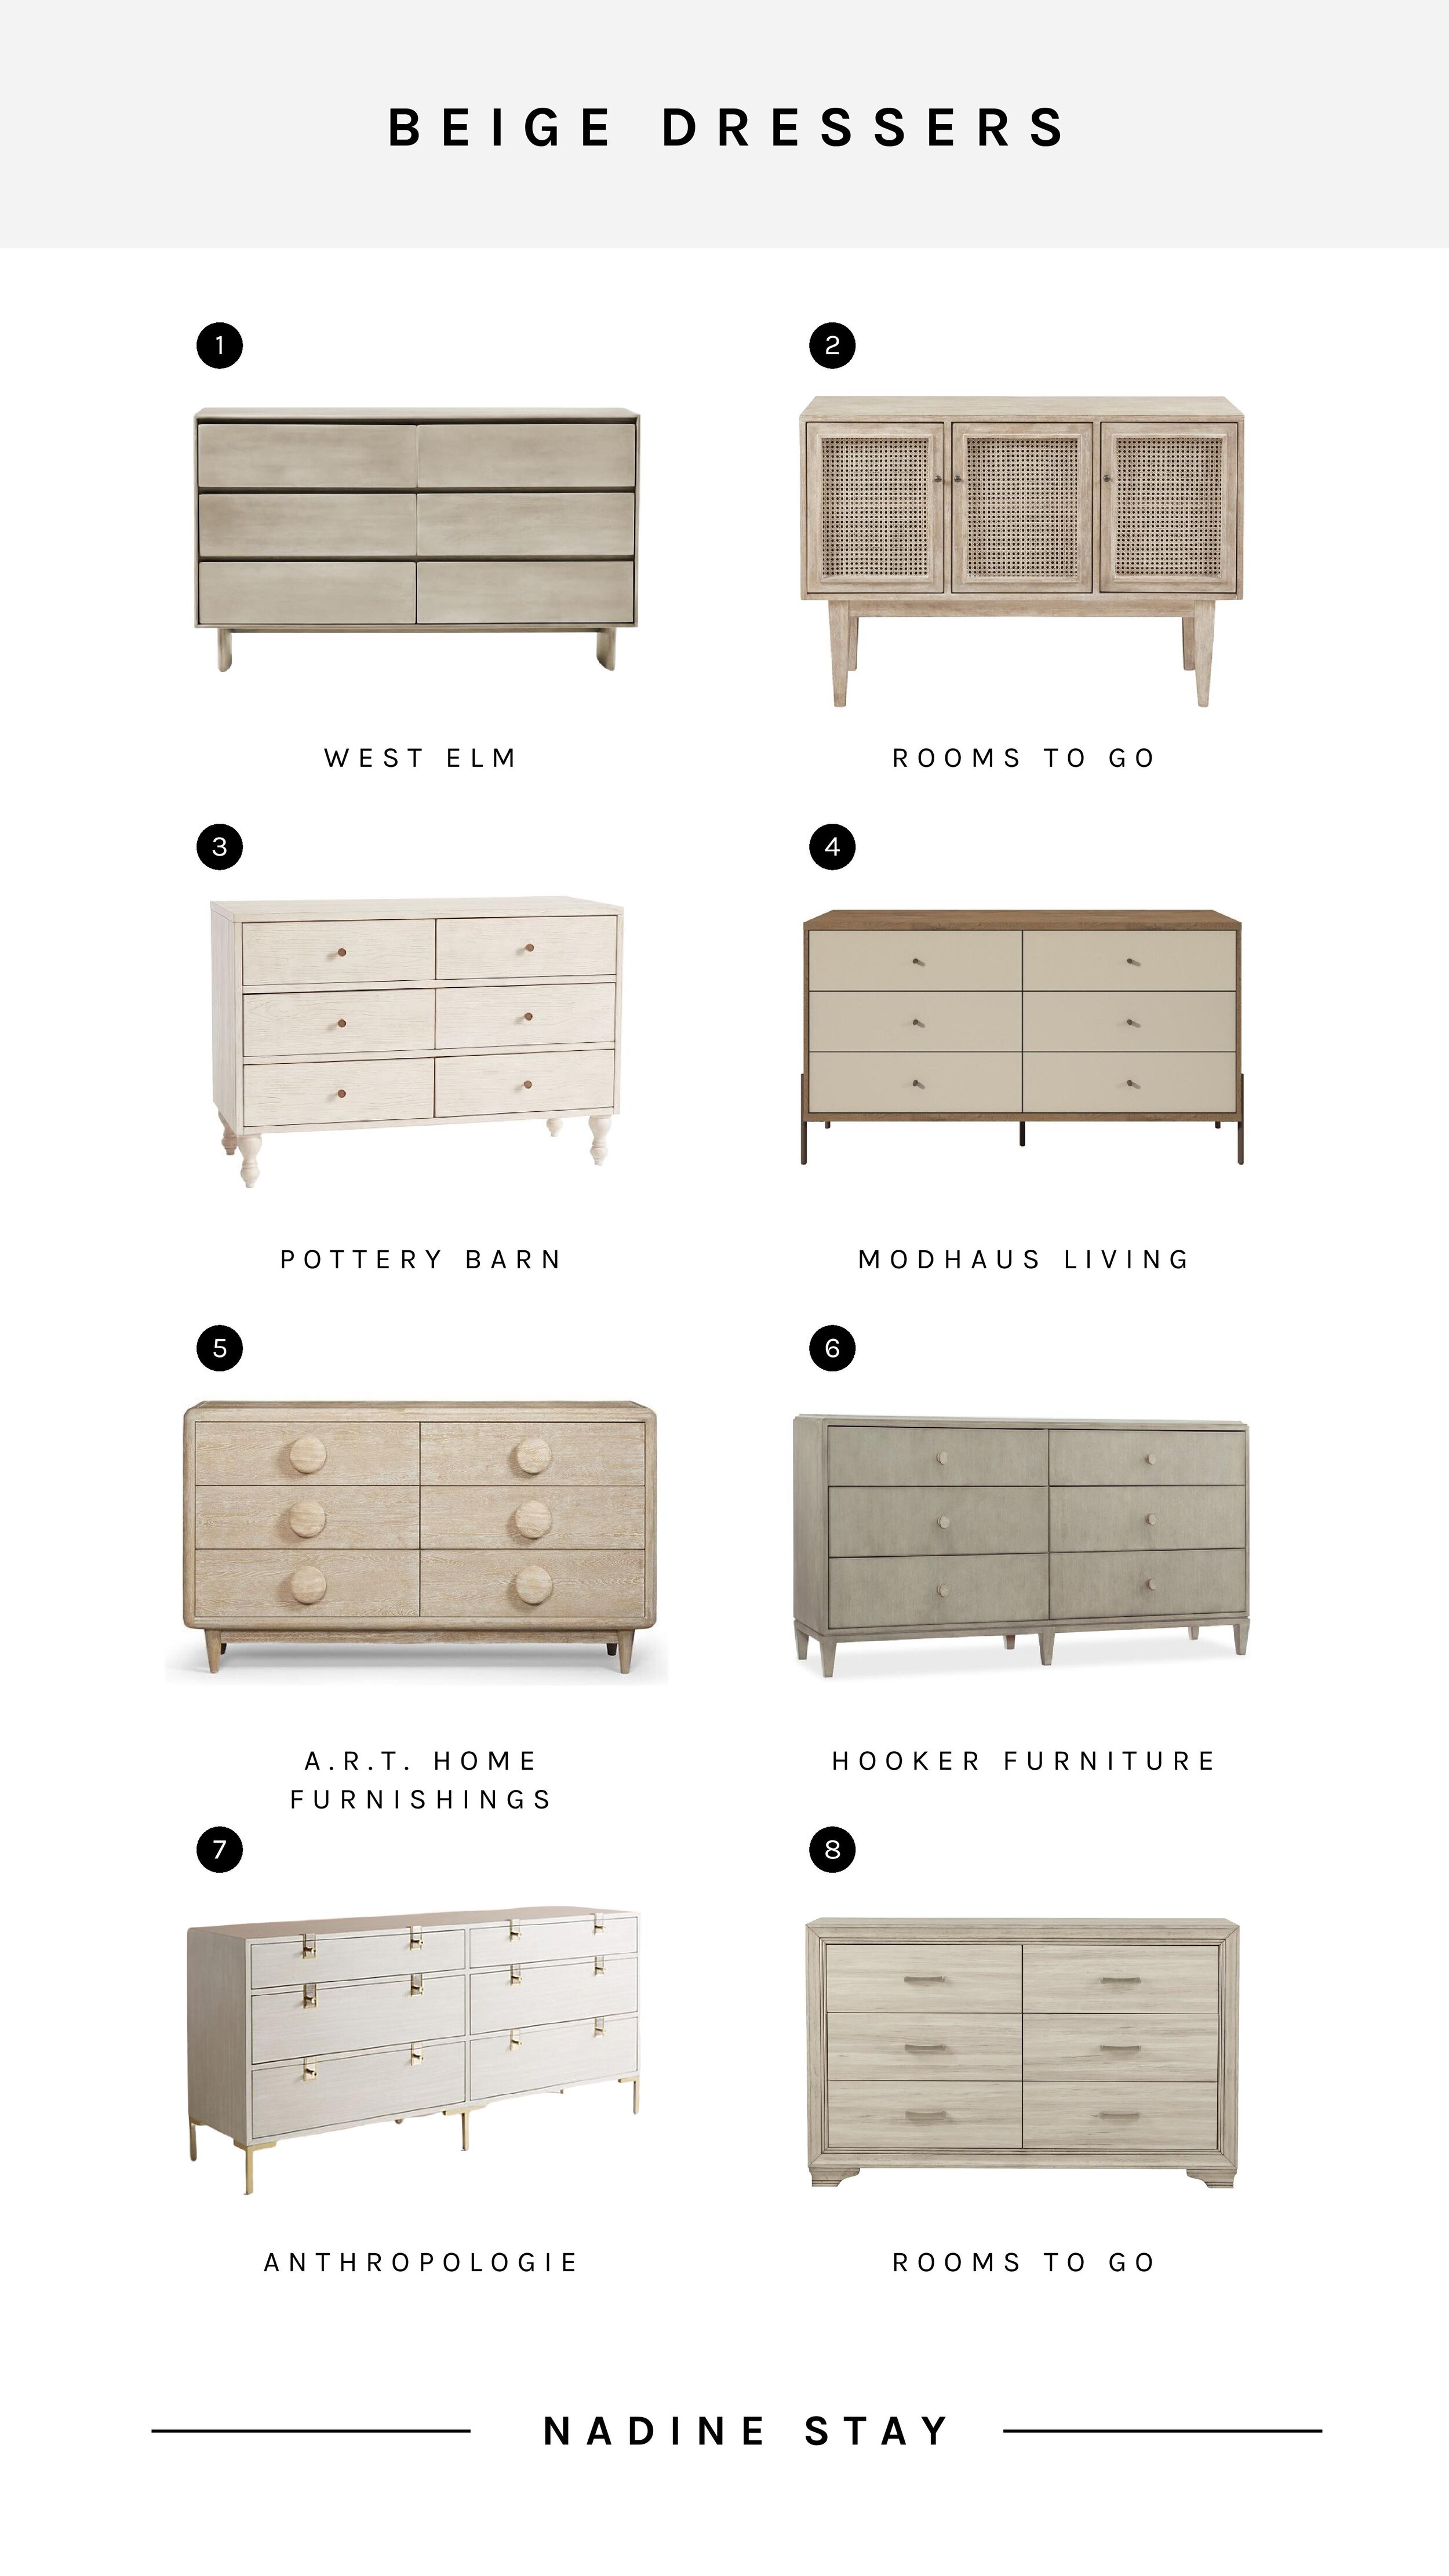 50 Shades of Beige (And 16 Beige Dressers + Artwork) - Beige cabinet inspiration, "dirty white" wall color ideas, and beige accent decor inspiration by Nadine Stay